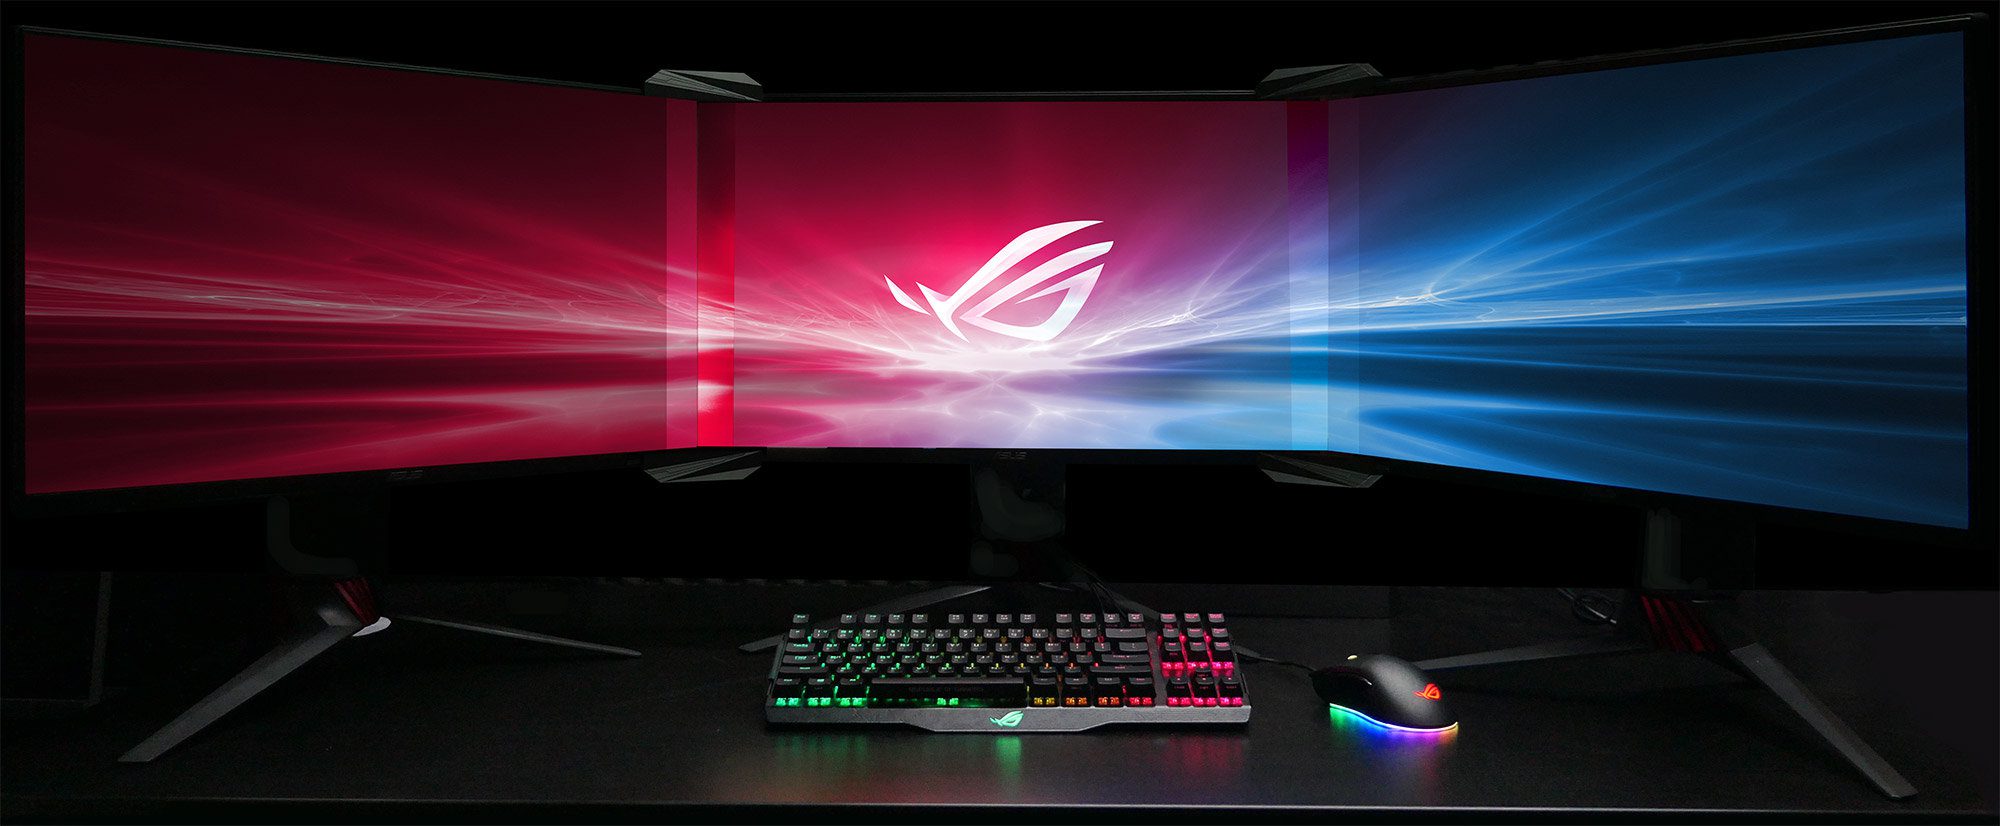 Asus Bezel-Free Kit gives you a Seamless Display